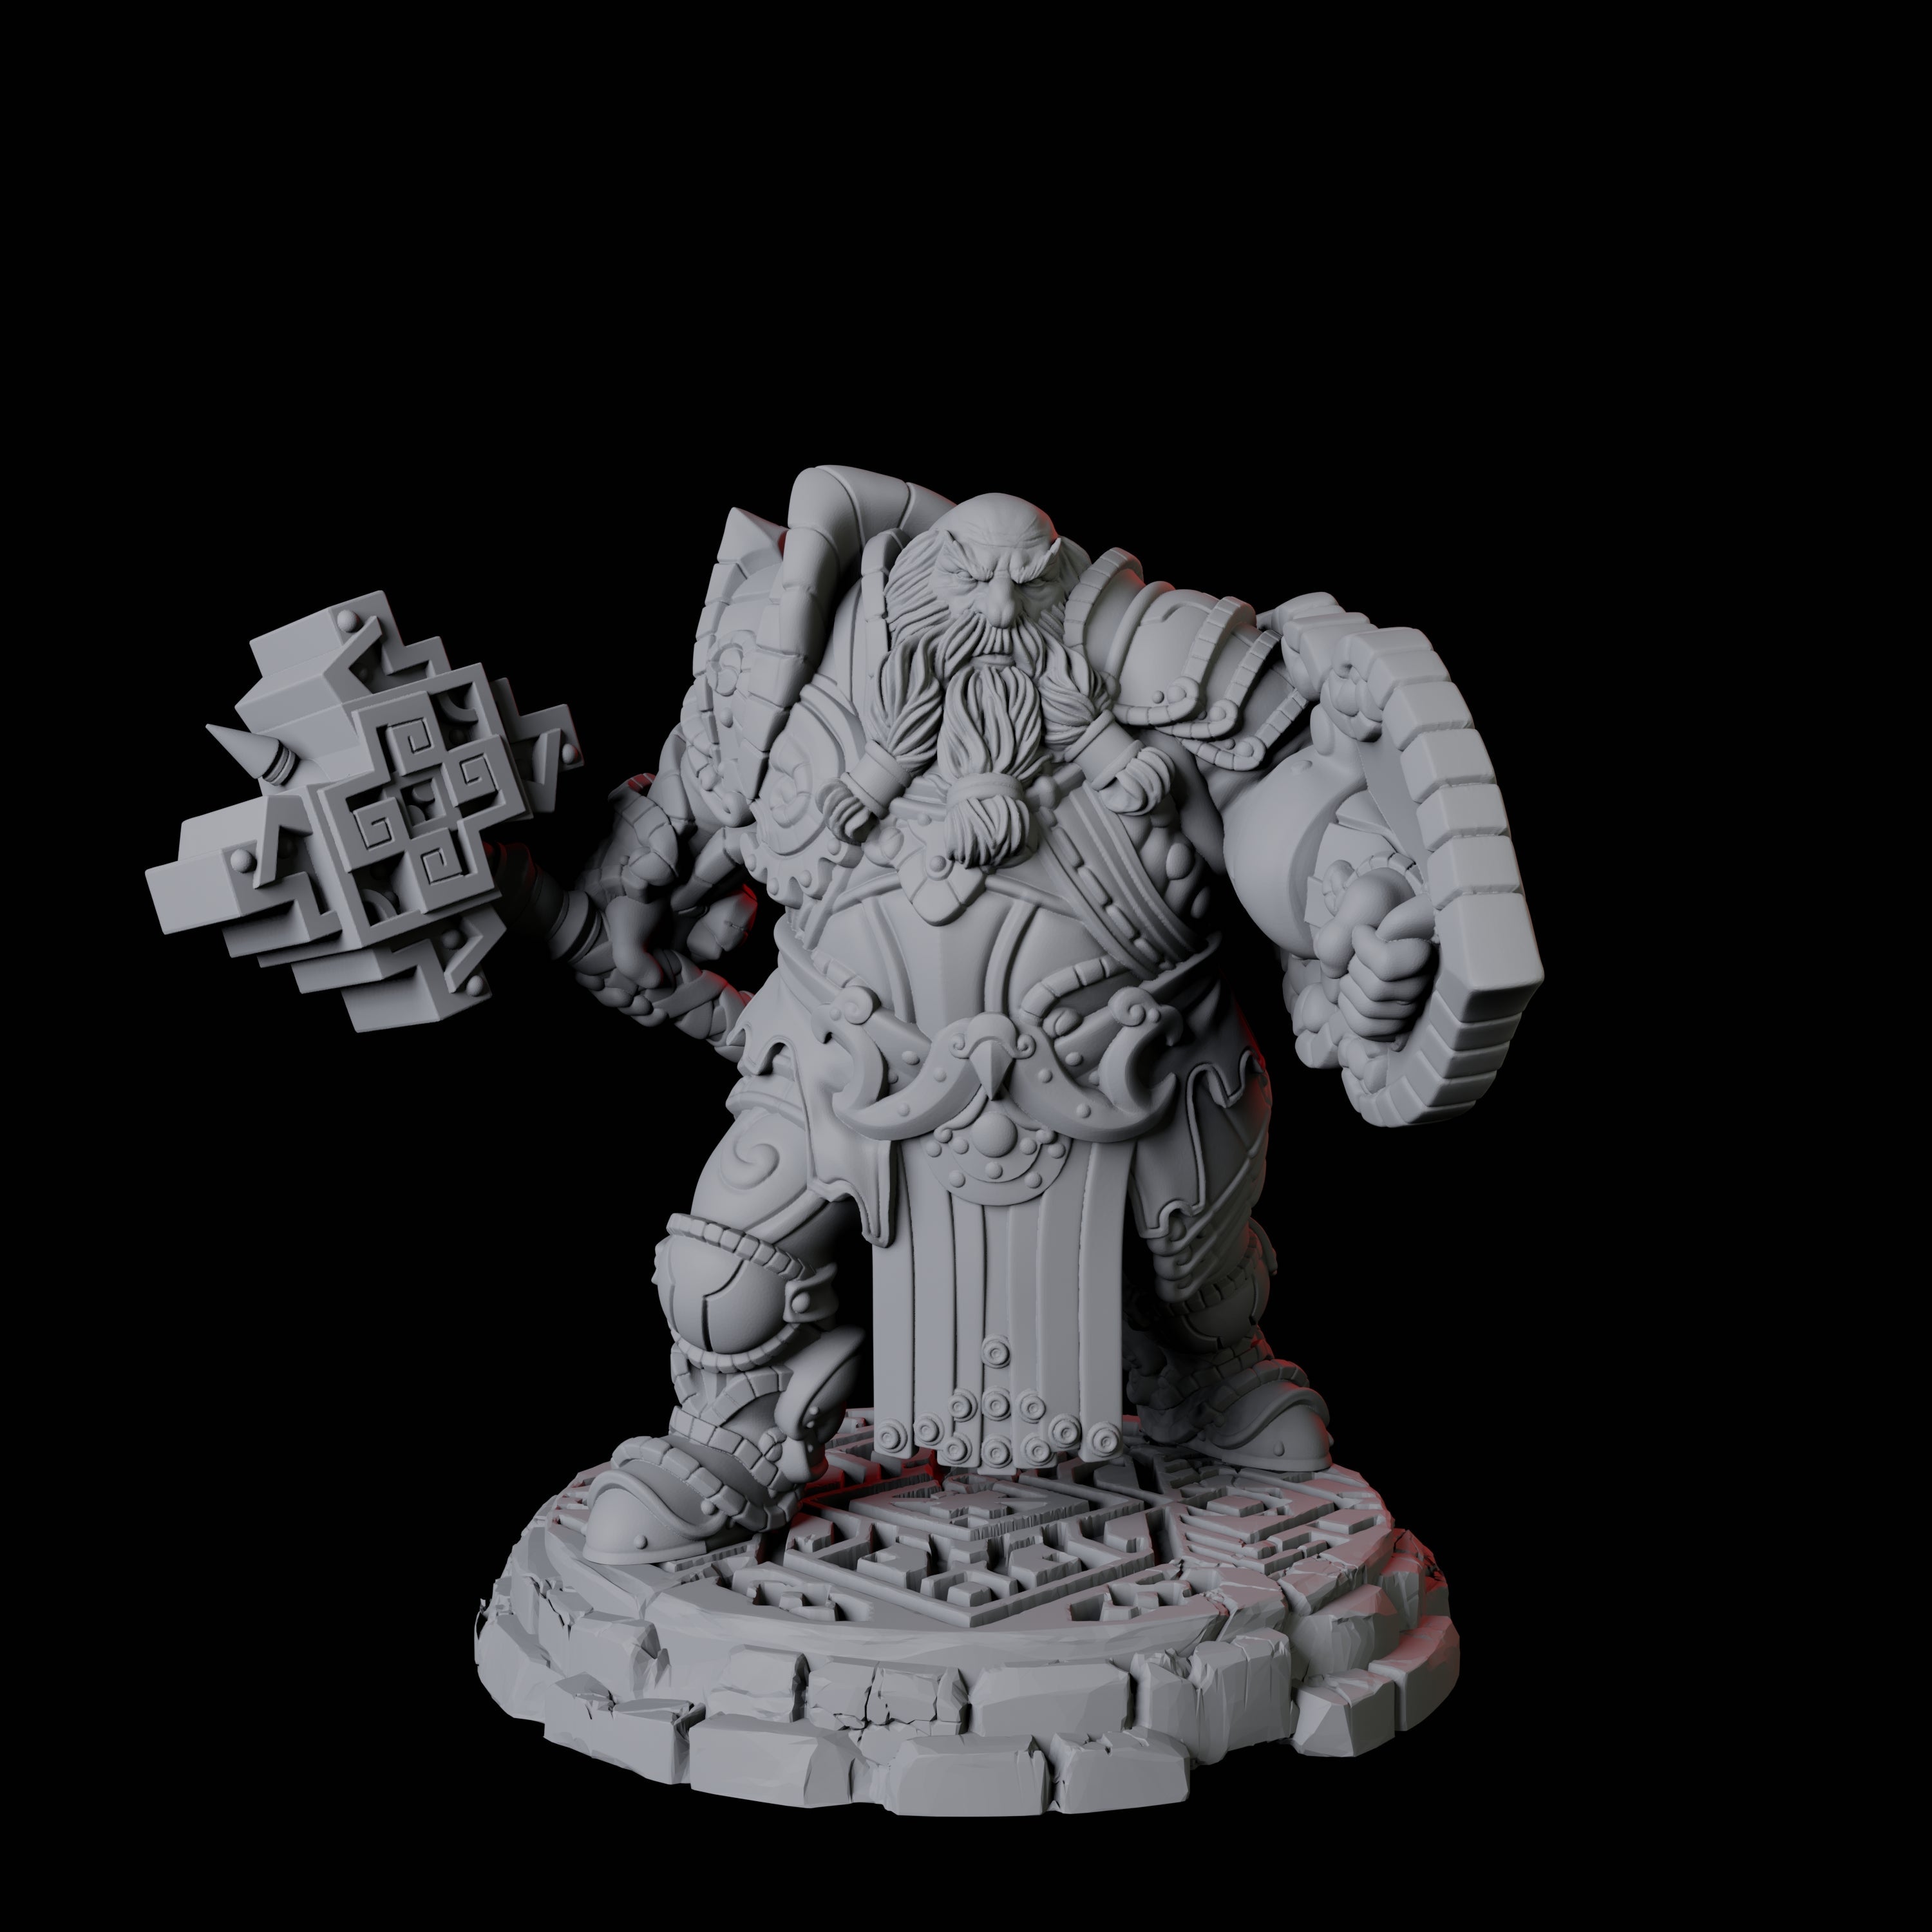 Heavy Armoured Dwarf Warrior B Miniature for Dungeons and Dragons, Pathfinder or other TTRPGs